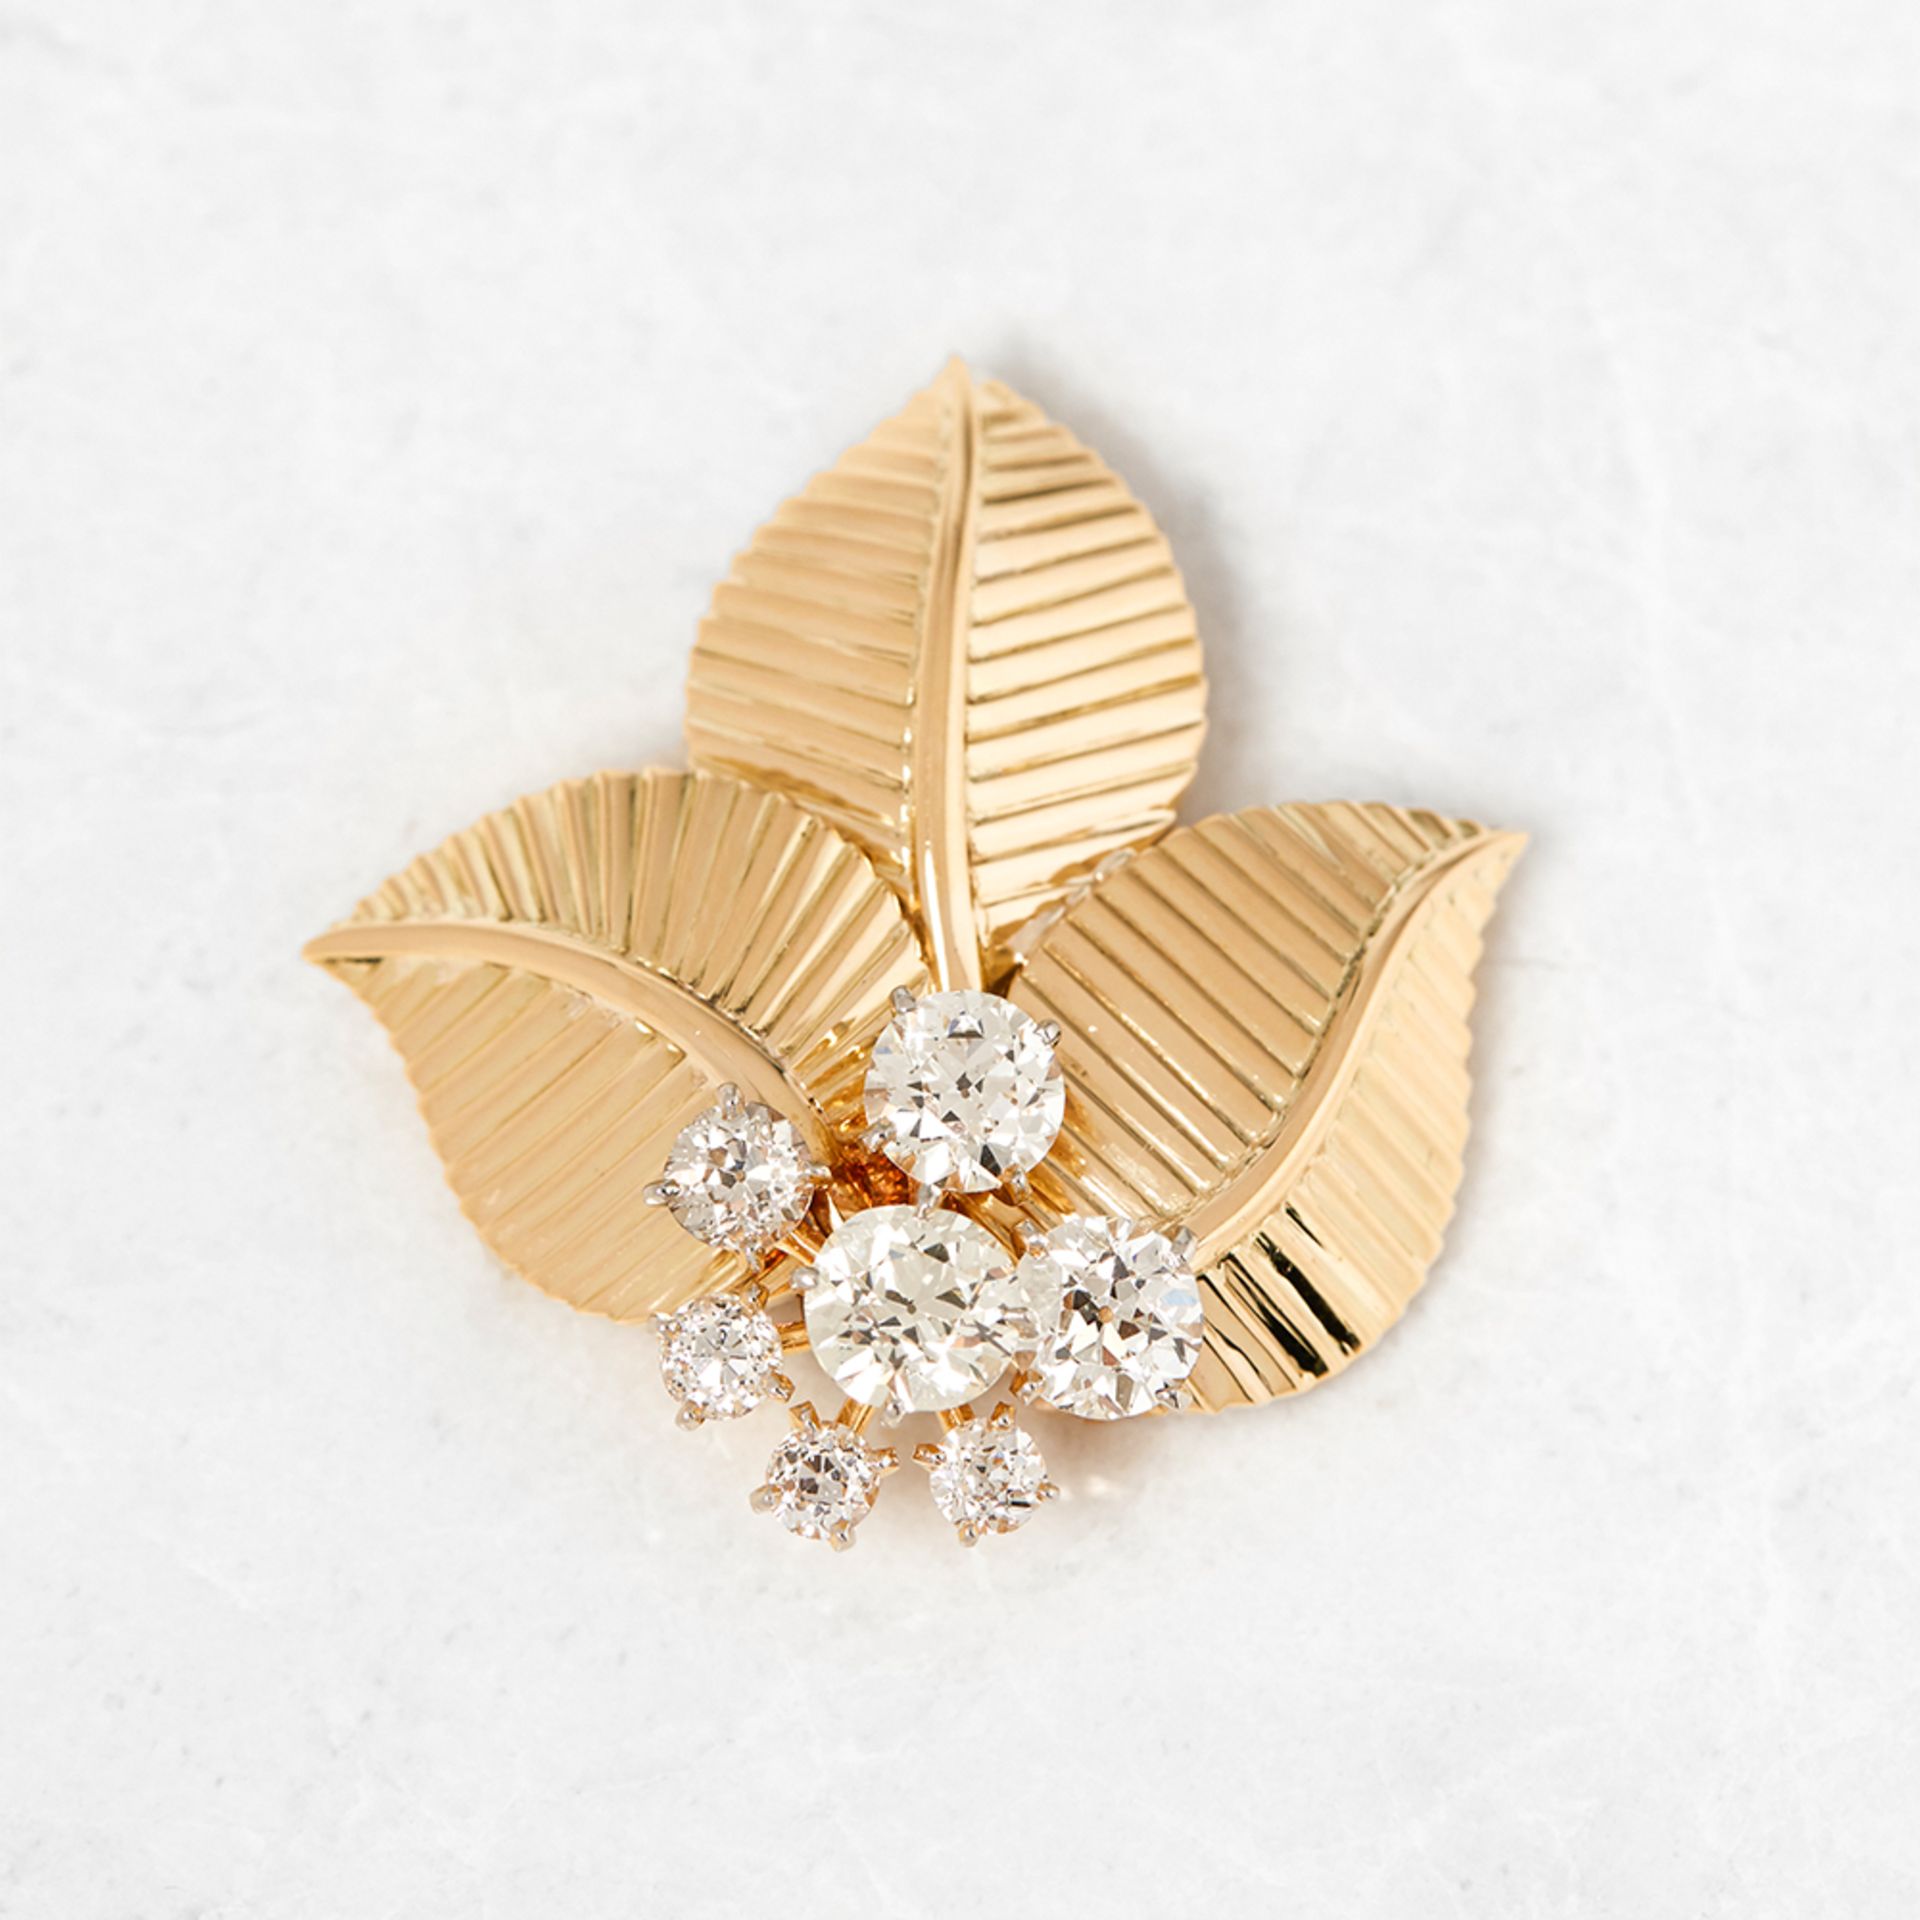 Cartier 18k Yellow Gold Diamond Vintage Leaf Brooch with Presentation Box - Image 4 of 16